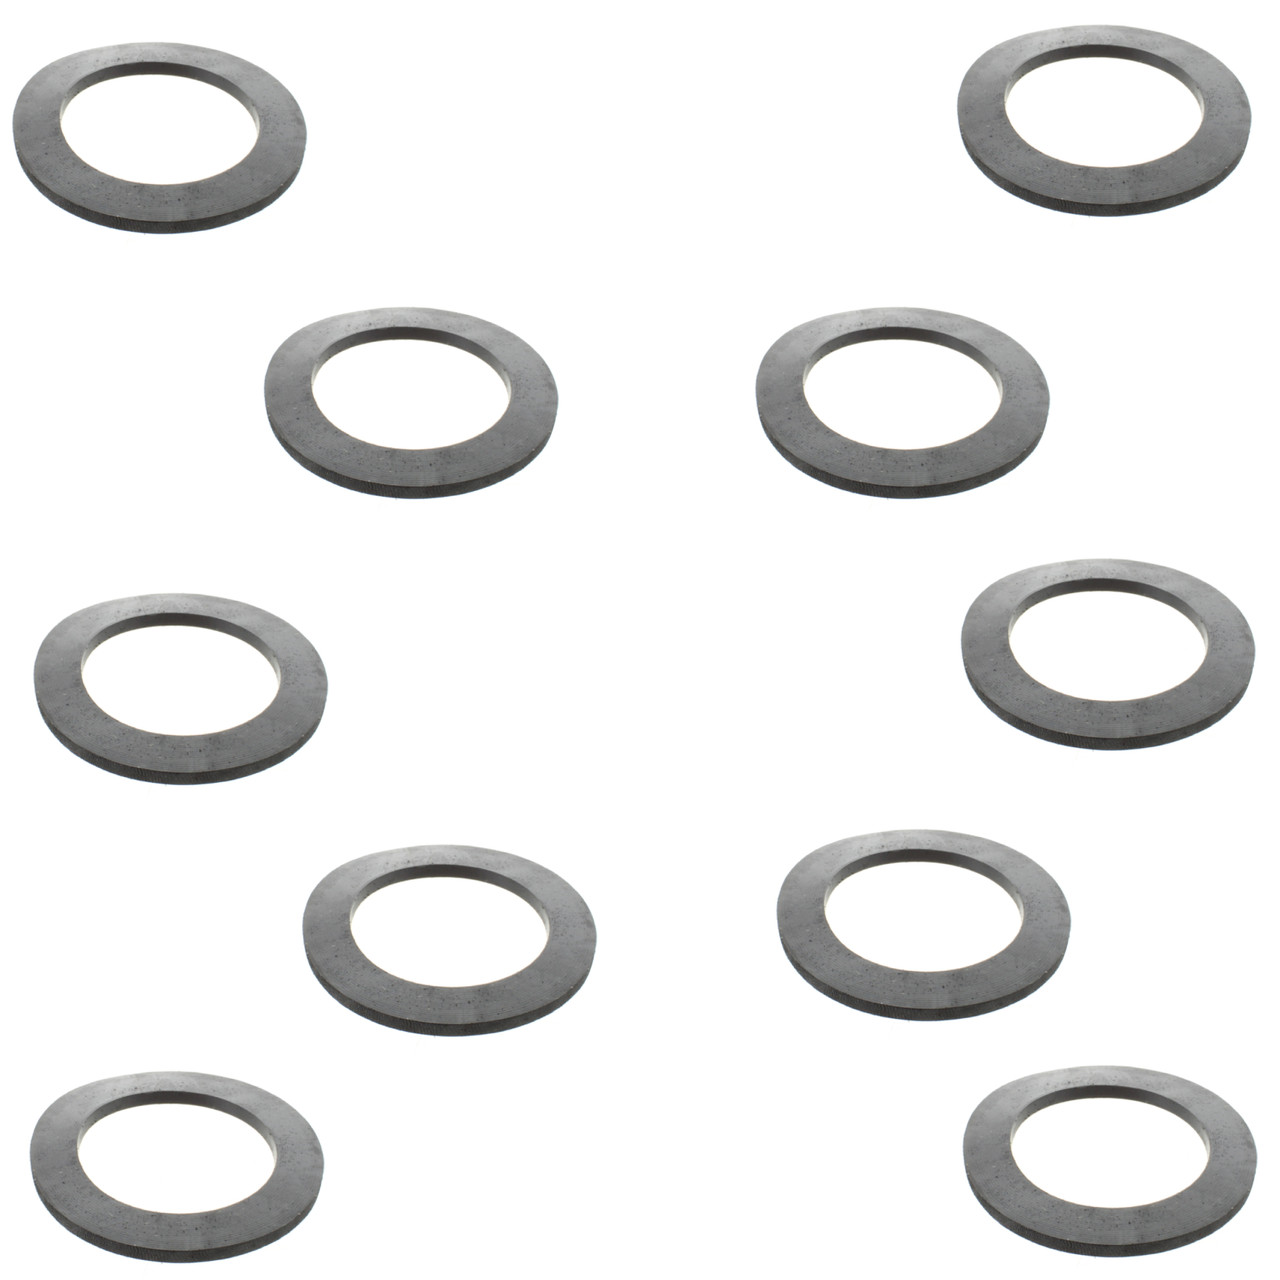 Mercury Marine Mercruiser New OEM Rubber Oil Injection Components Gasket Set of 10 42999 42999T